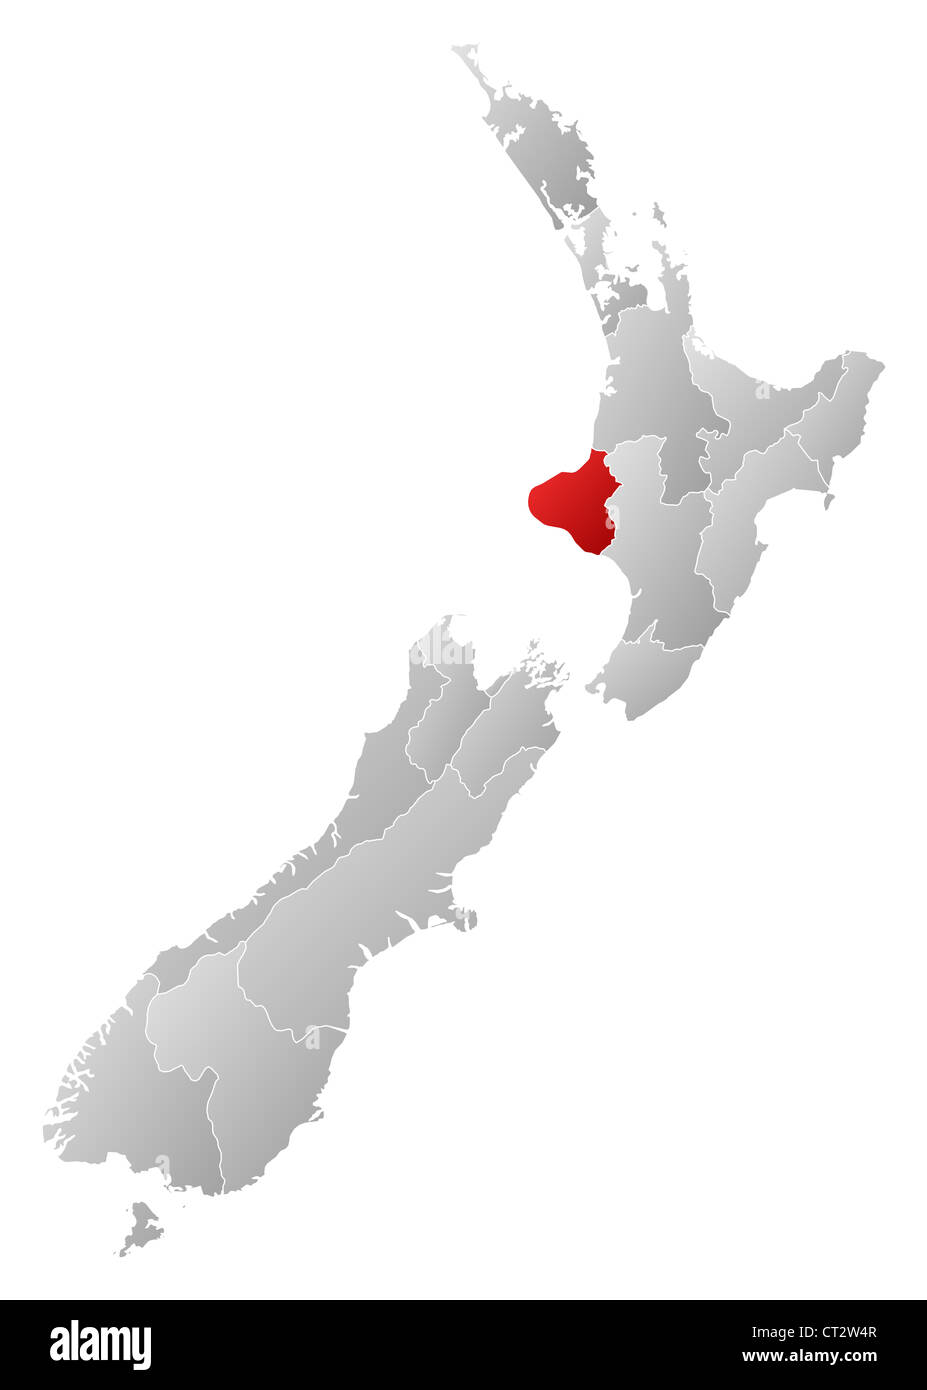 Political map of New Zealand with the several regions where Manawatu-Wanganui is highlighted. Stock Photo